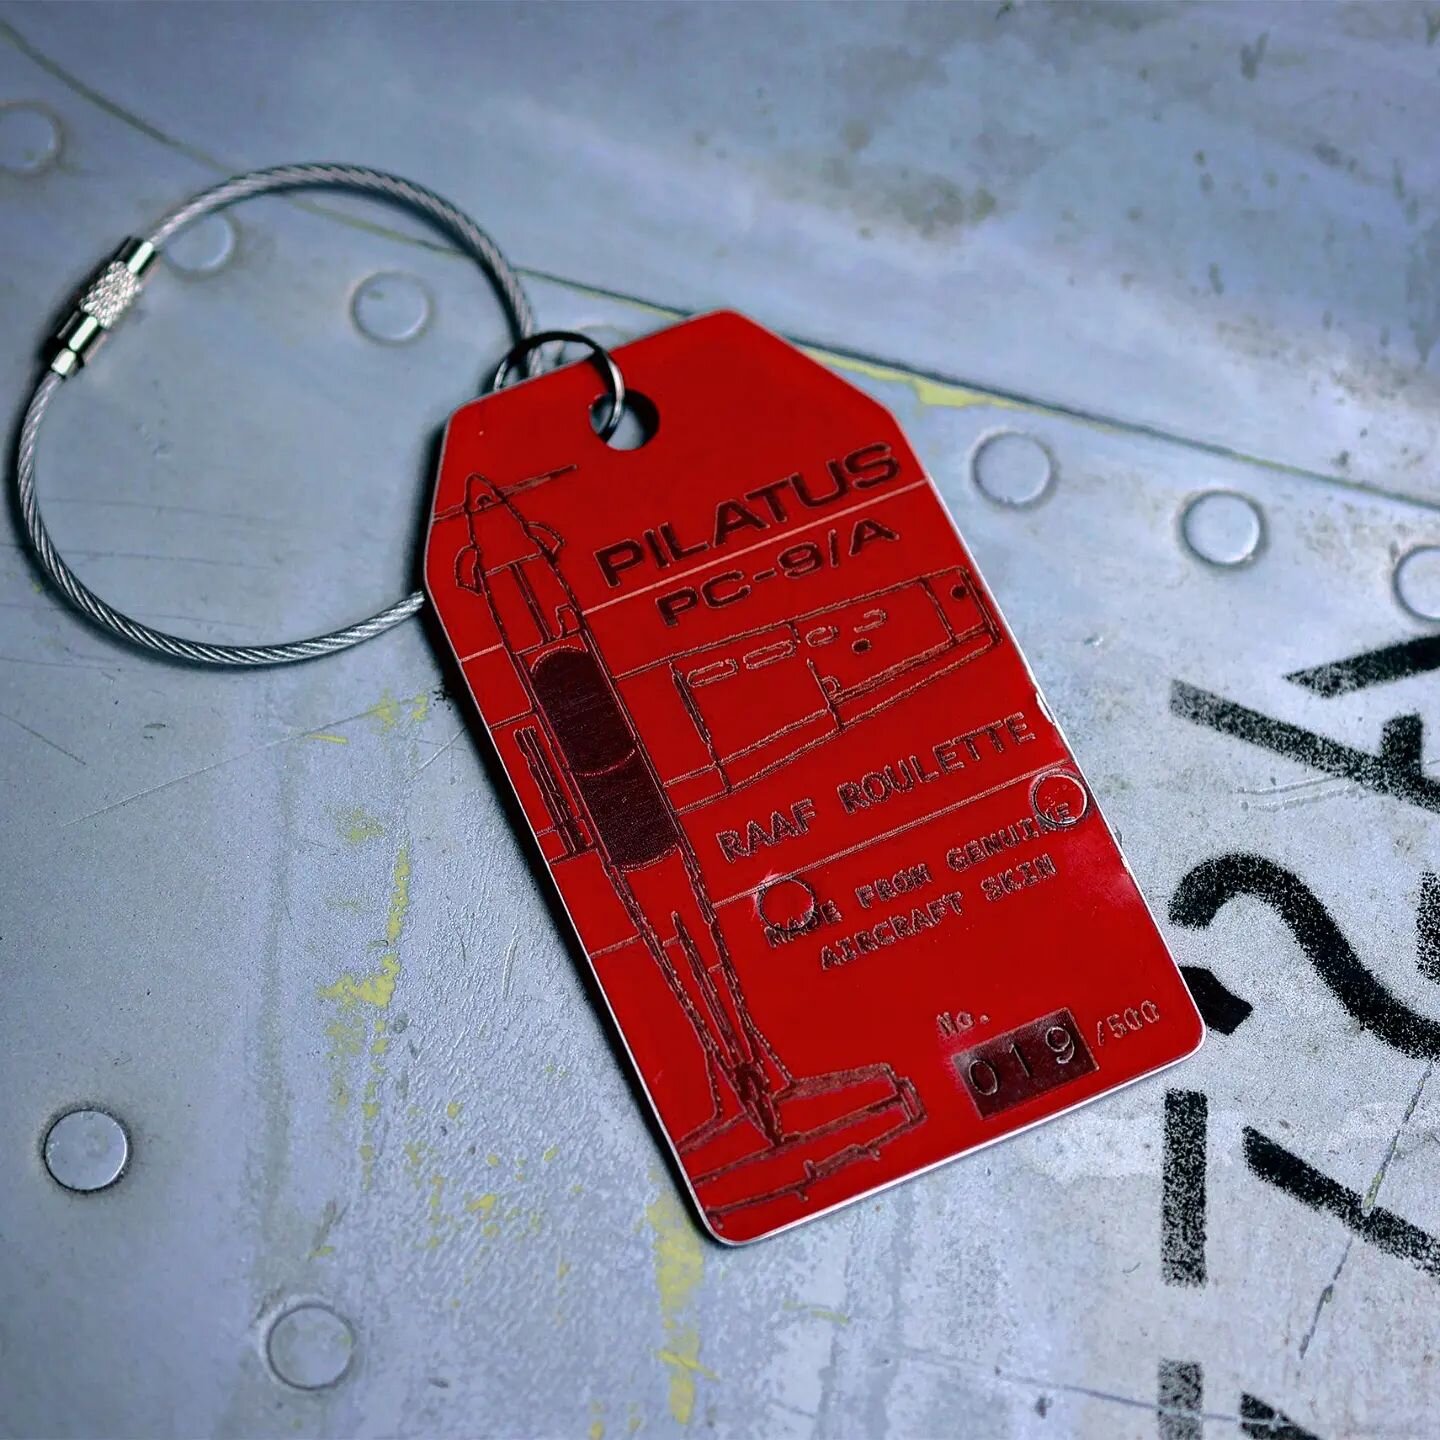 Coming soon. #reclaimed #aircraft skin #keyrings made from a RAAF #pilatus pc9 roulette 

Will be available for purchase from Relic Design &amp; Craft co website or etsy page in the upcoming weeks. 

#recycled #upcycled #relicdesignandcraftco #repurp